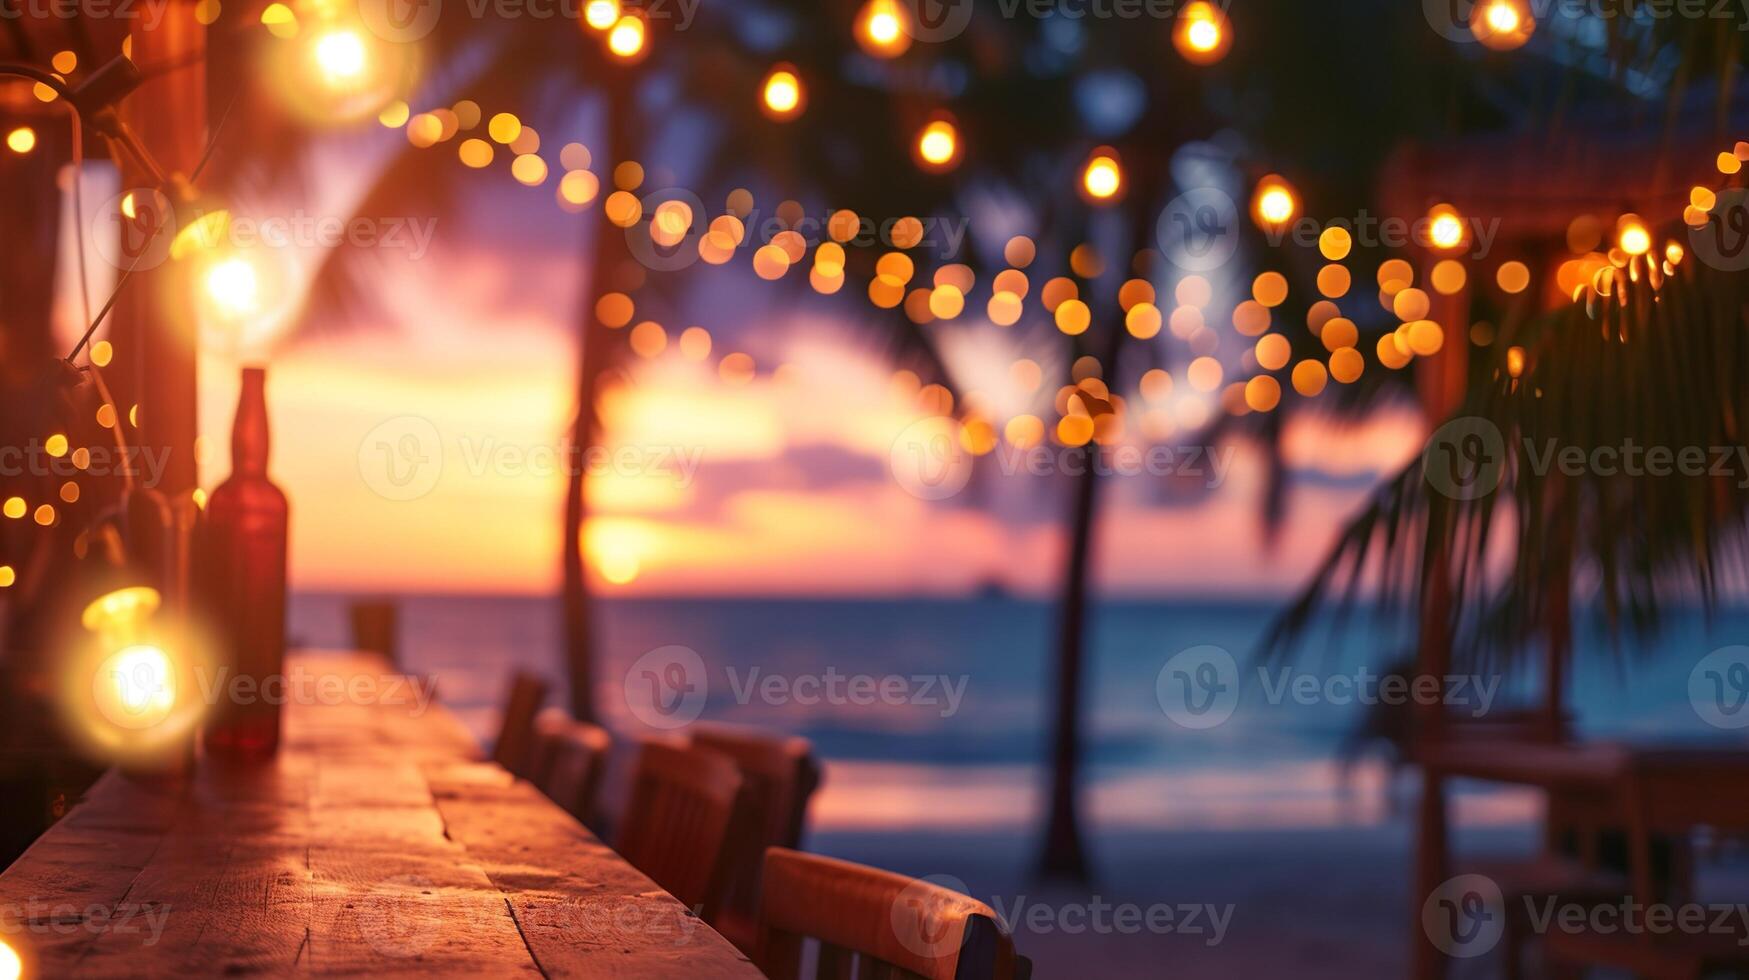 AI generated Blurred beach bar background at sunset. Bar top and chairs, palm trees, warm string lights, with ocean waves and a colorful sky. photo